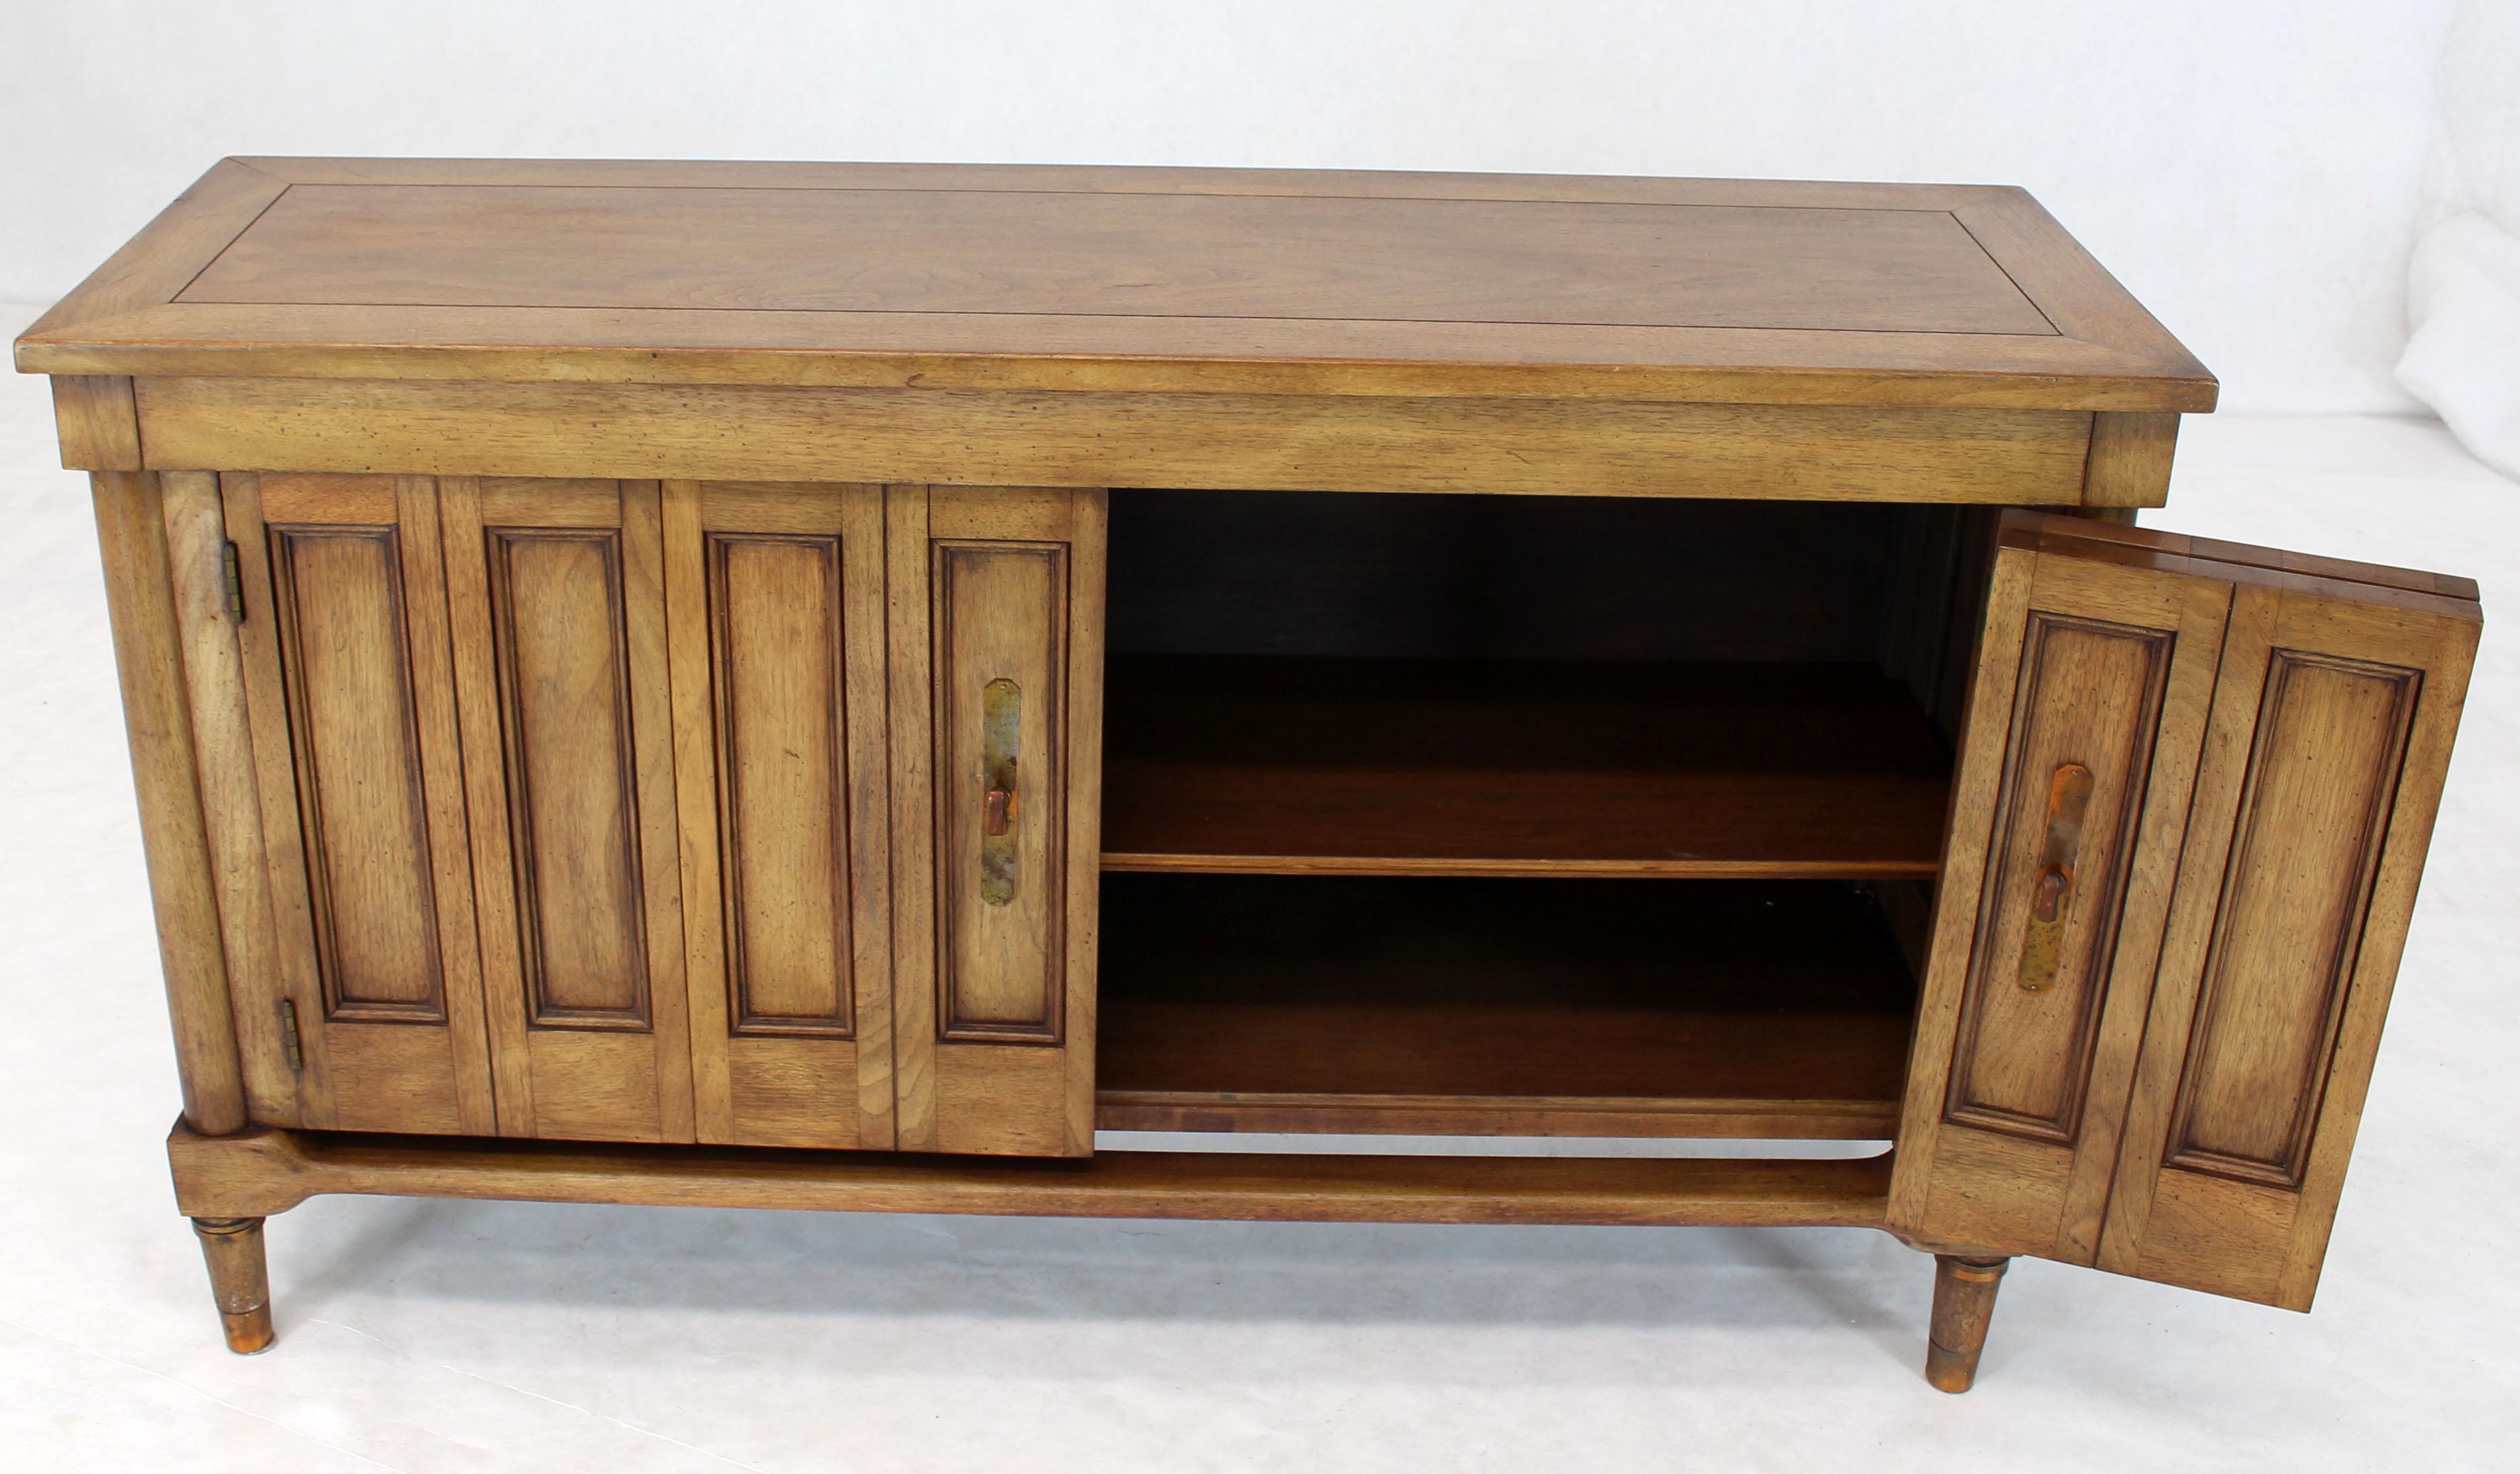 20th Century Mid-Century Modern Petit Fruitwood Credenza with Double Accordion Doors